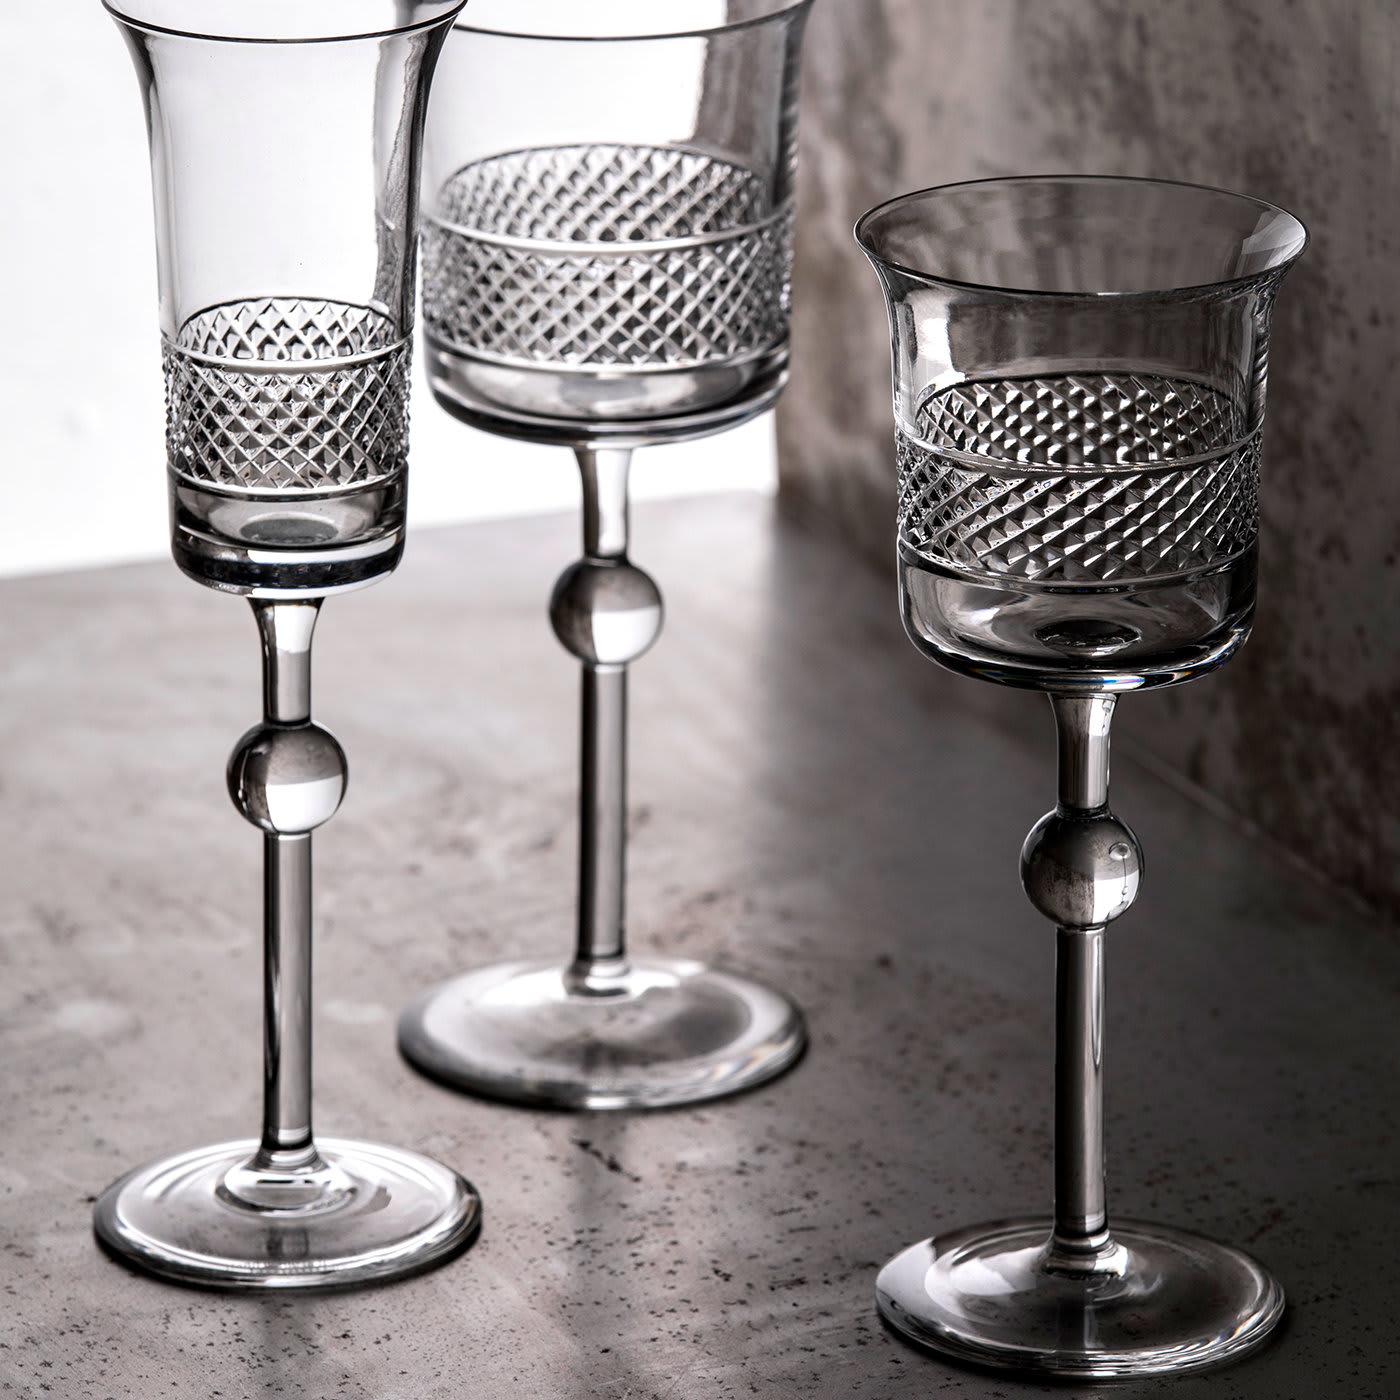 Part of the Diamond collection, this set of two wine goblets was designed by Claire Le Sage in 2004 and embodies Arnolfo di Cambio's aesthetic, in a fine balance between classic and contemporary inspirations. Both pieces are made of mouth-blown,